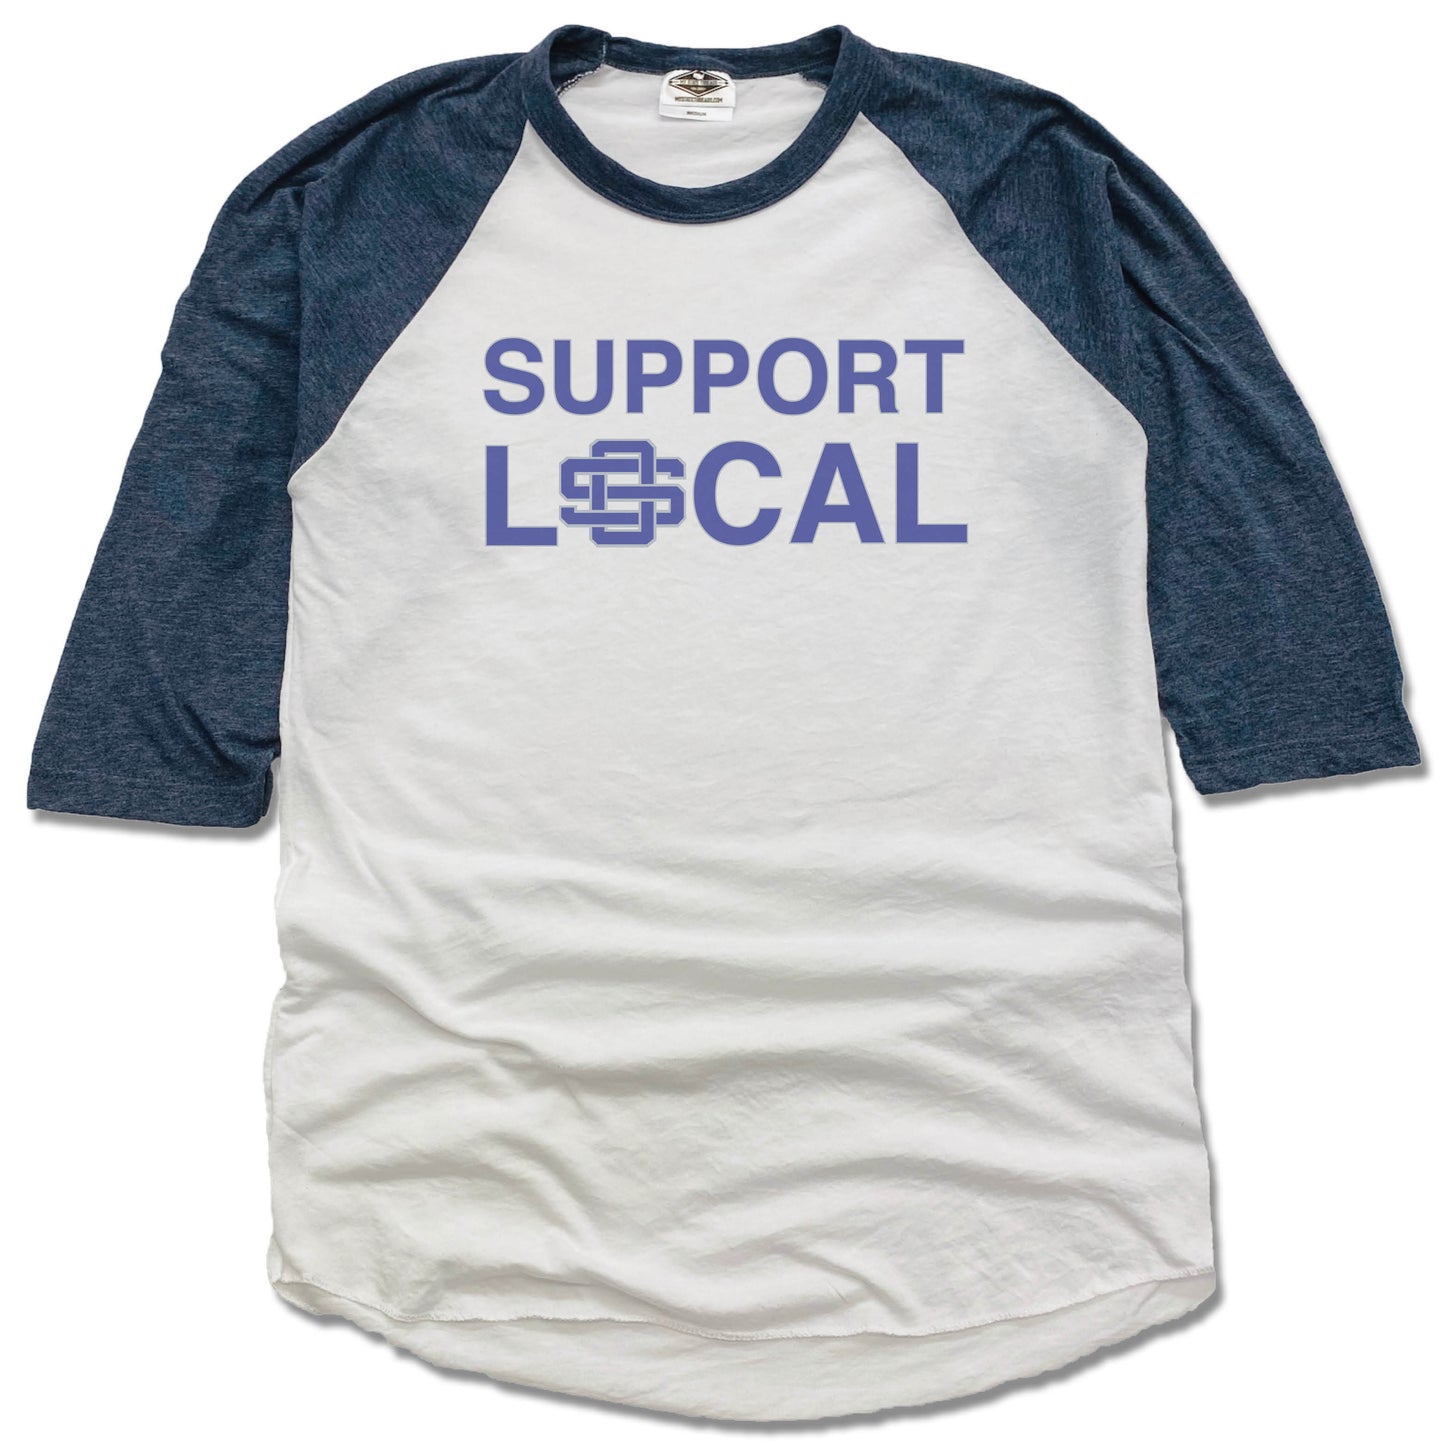 SUPPORT LOCAL | NVY 3/4 SLEEVE | OCEAN SPRINGS